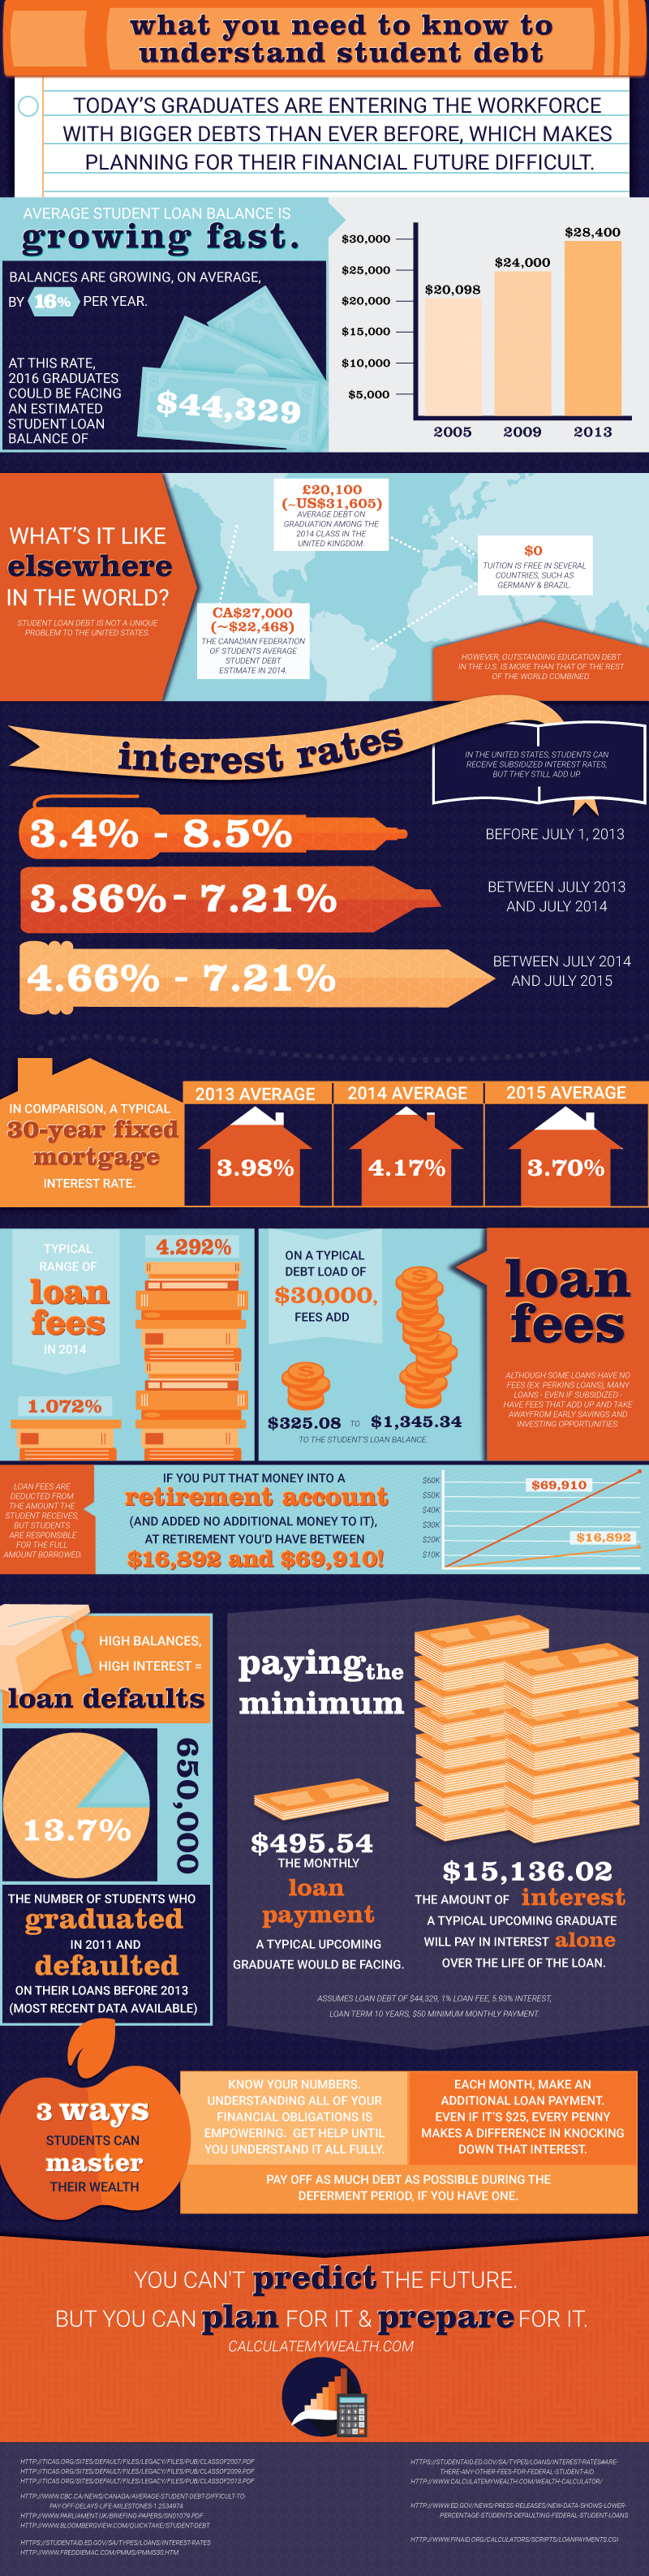 What You Need to Know to Understand Student Debt (INFOGRAPHIC)